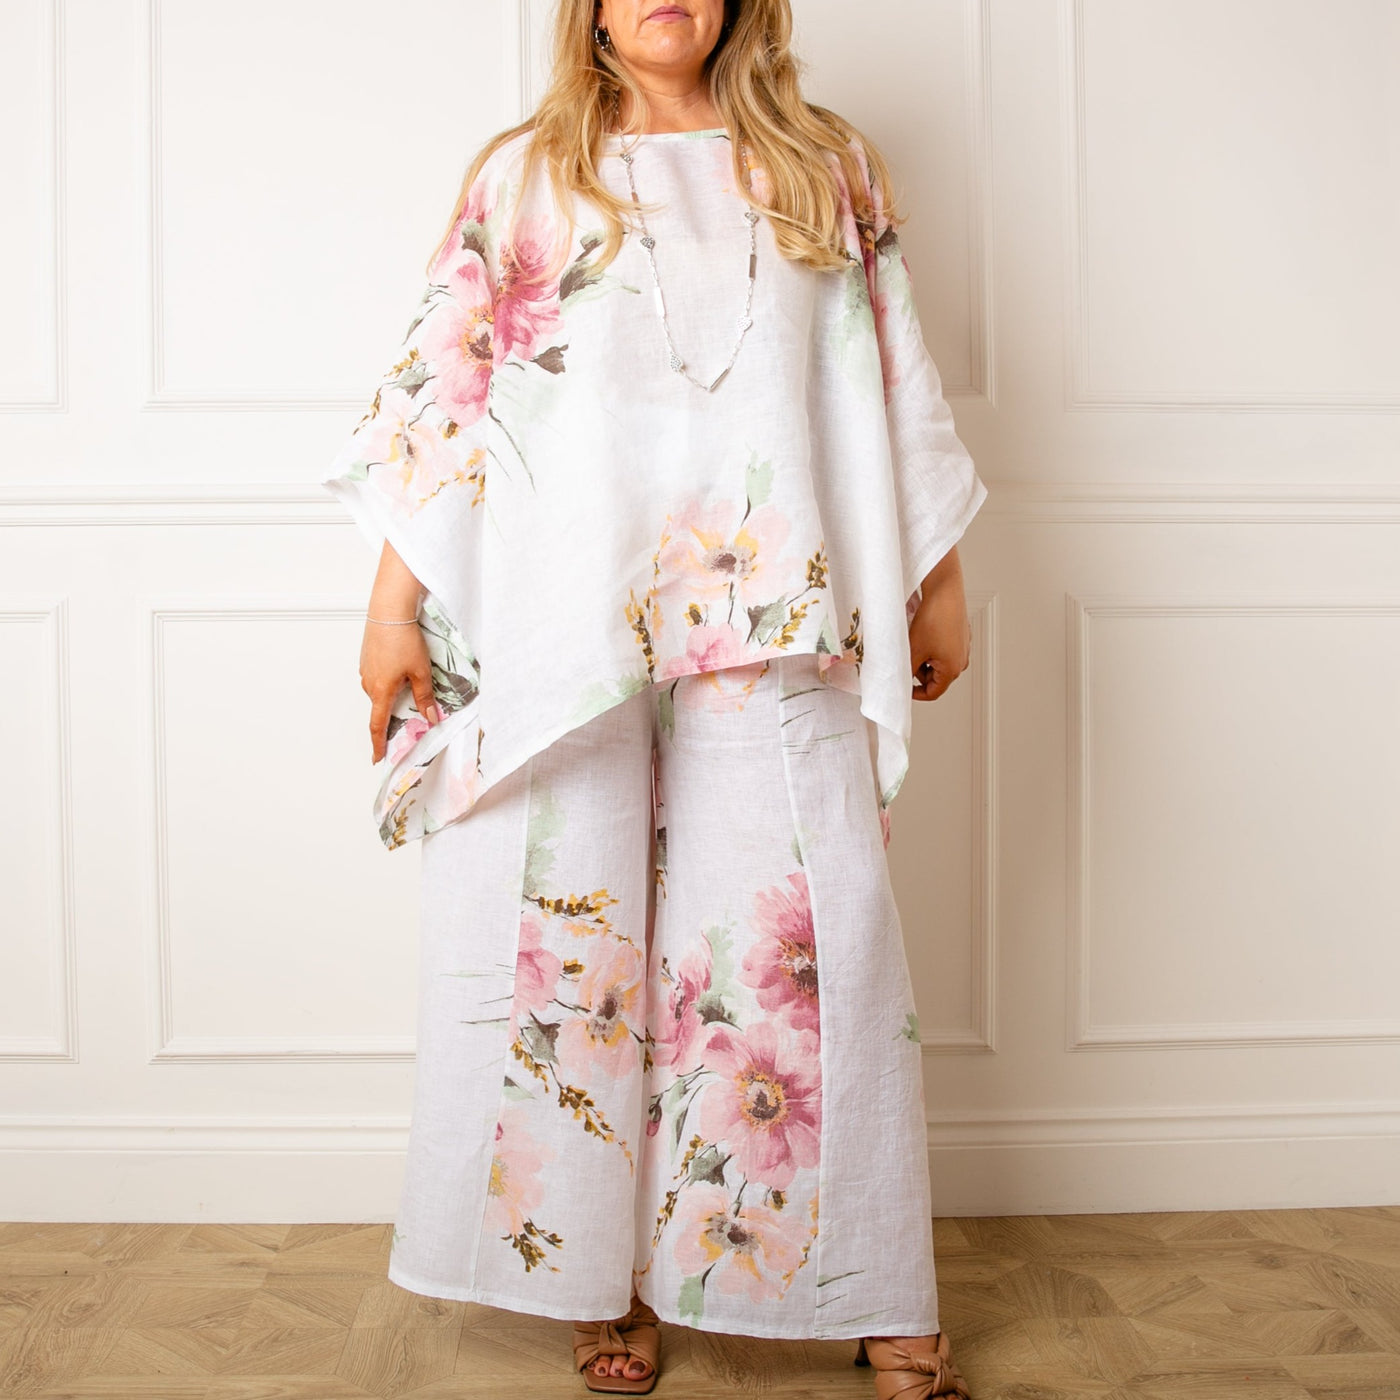 The white Bouquet Print Linen Top with a round neckline and a relaxed fit